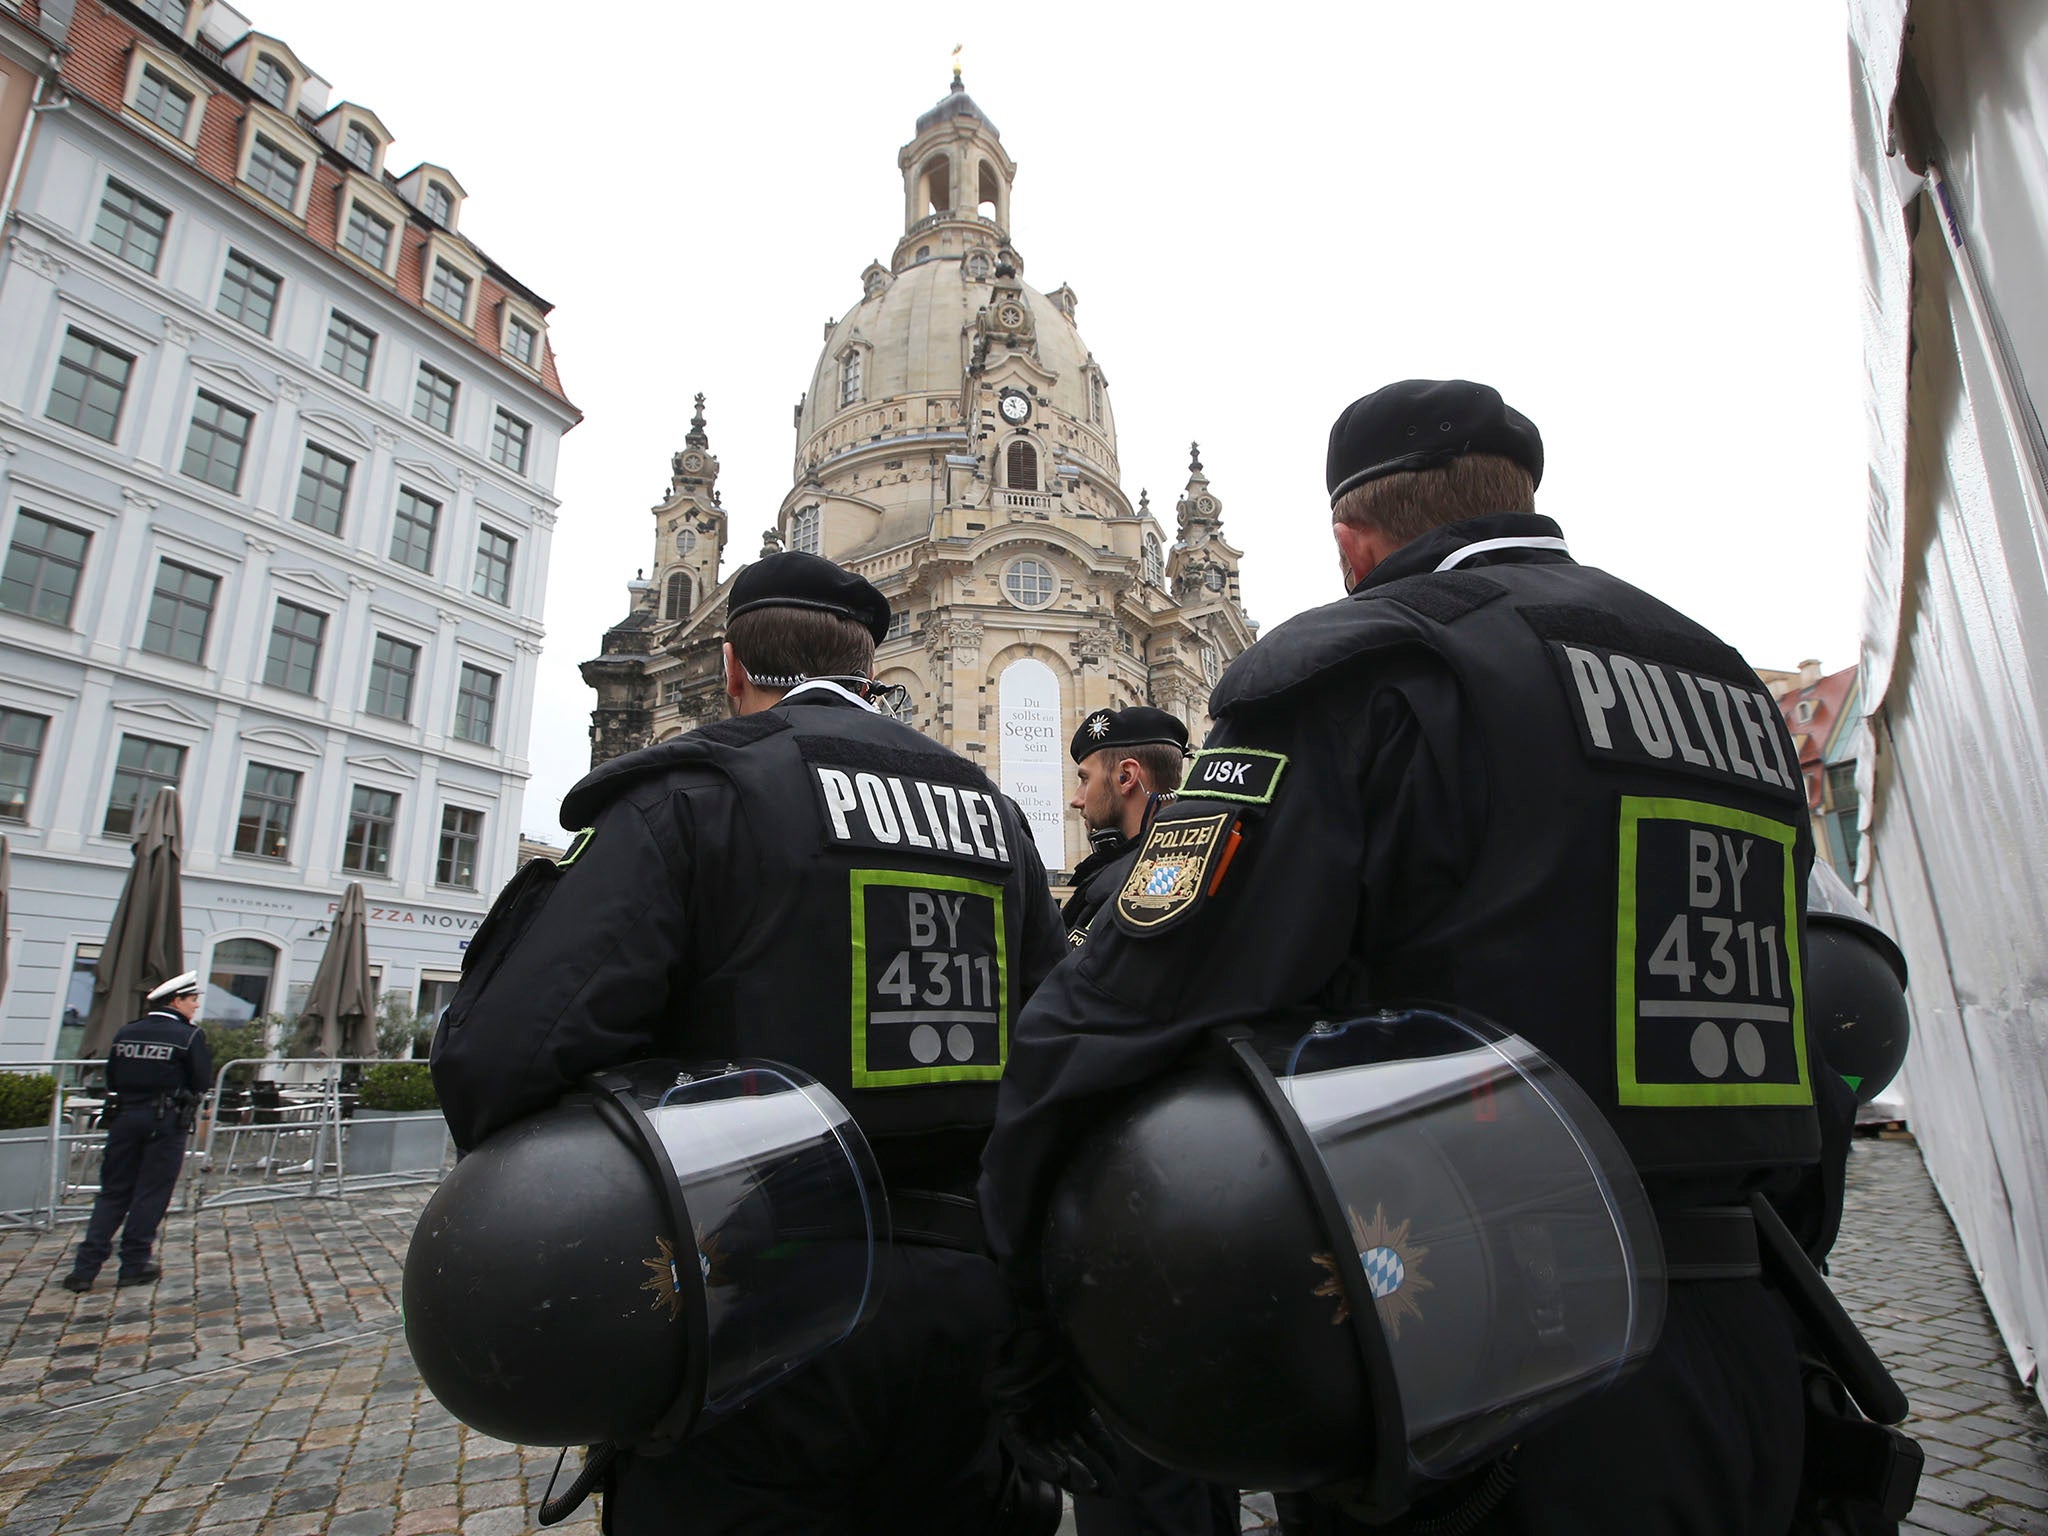 Police in Dresden said that two speakers broke the law at a far-right rally on Saturday